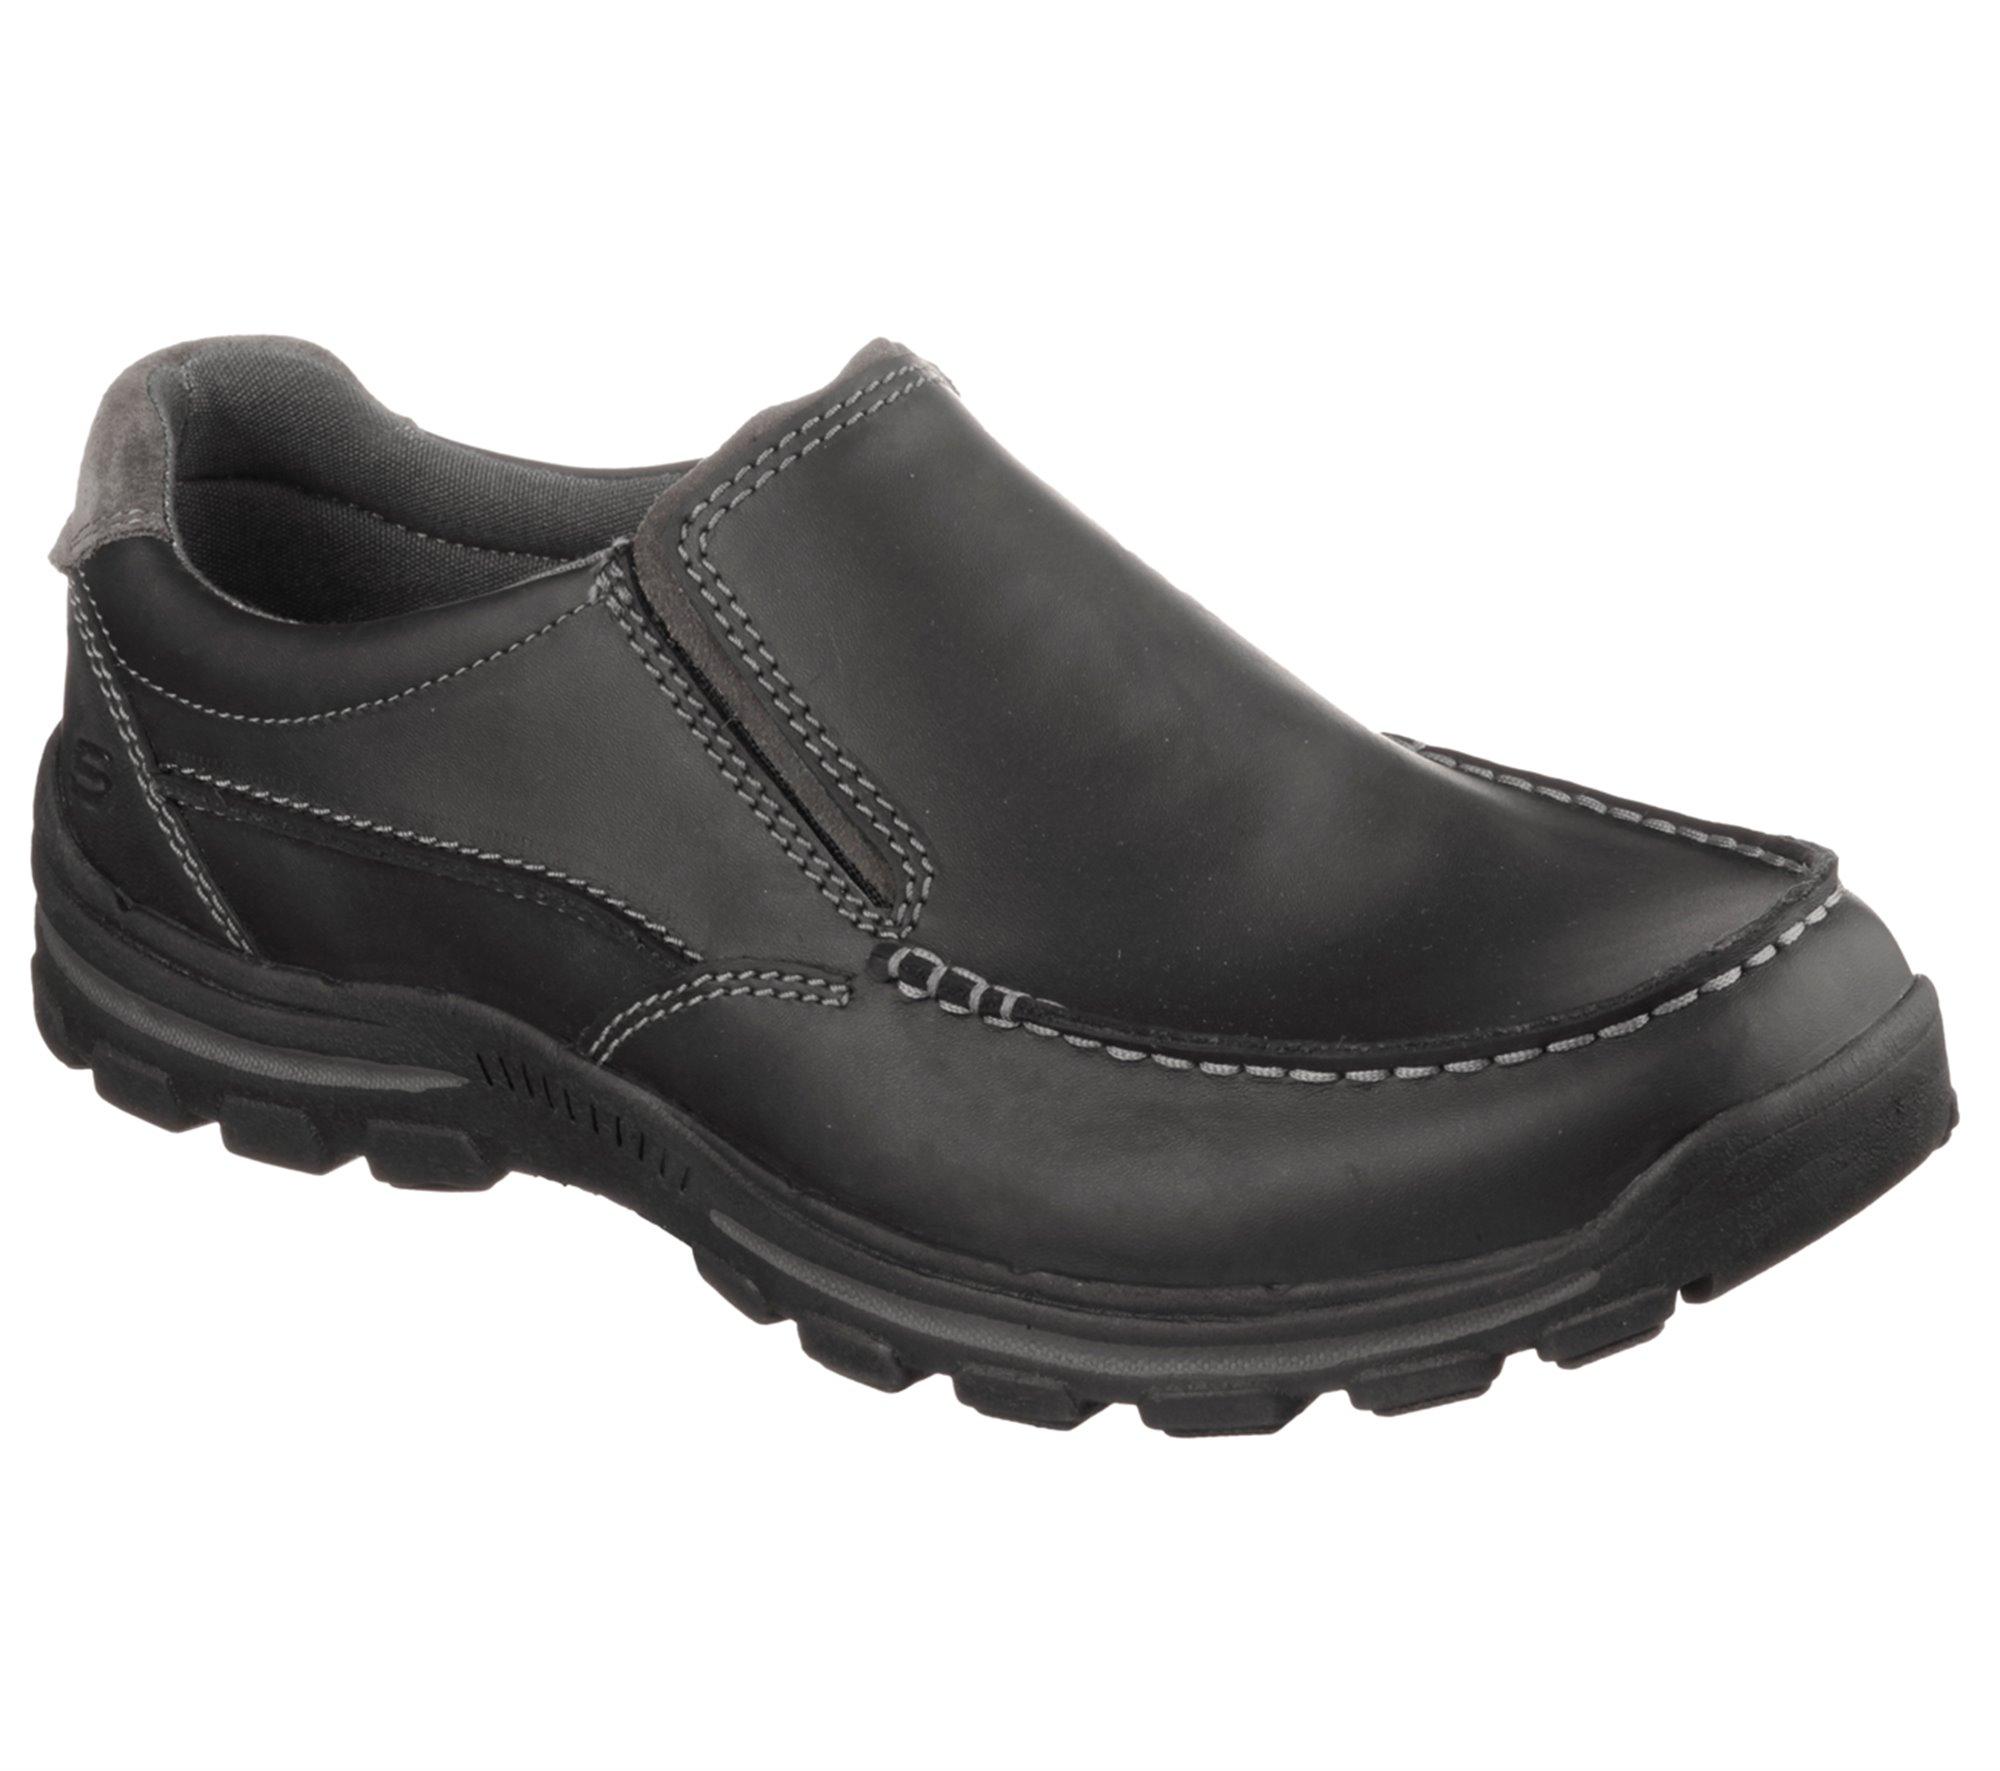 Skechers Suede Relaxed Fit: Braver - Rayland - Final Sale in Black for ...